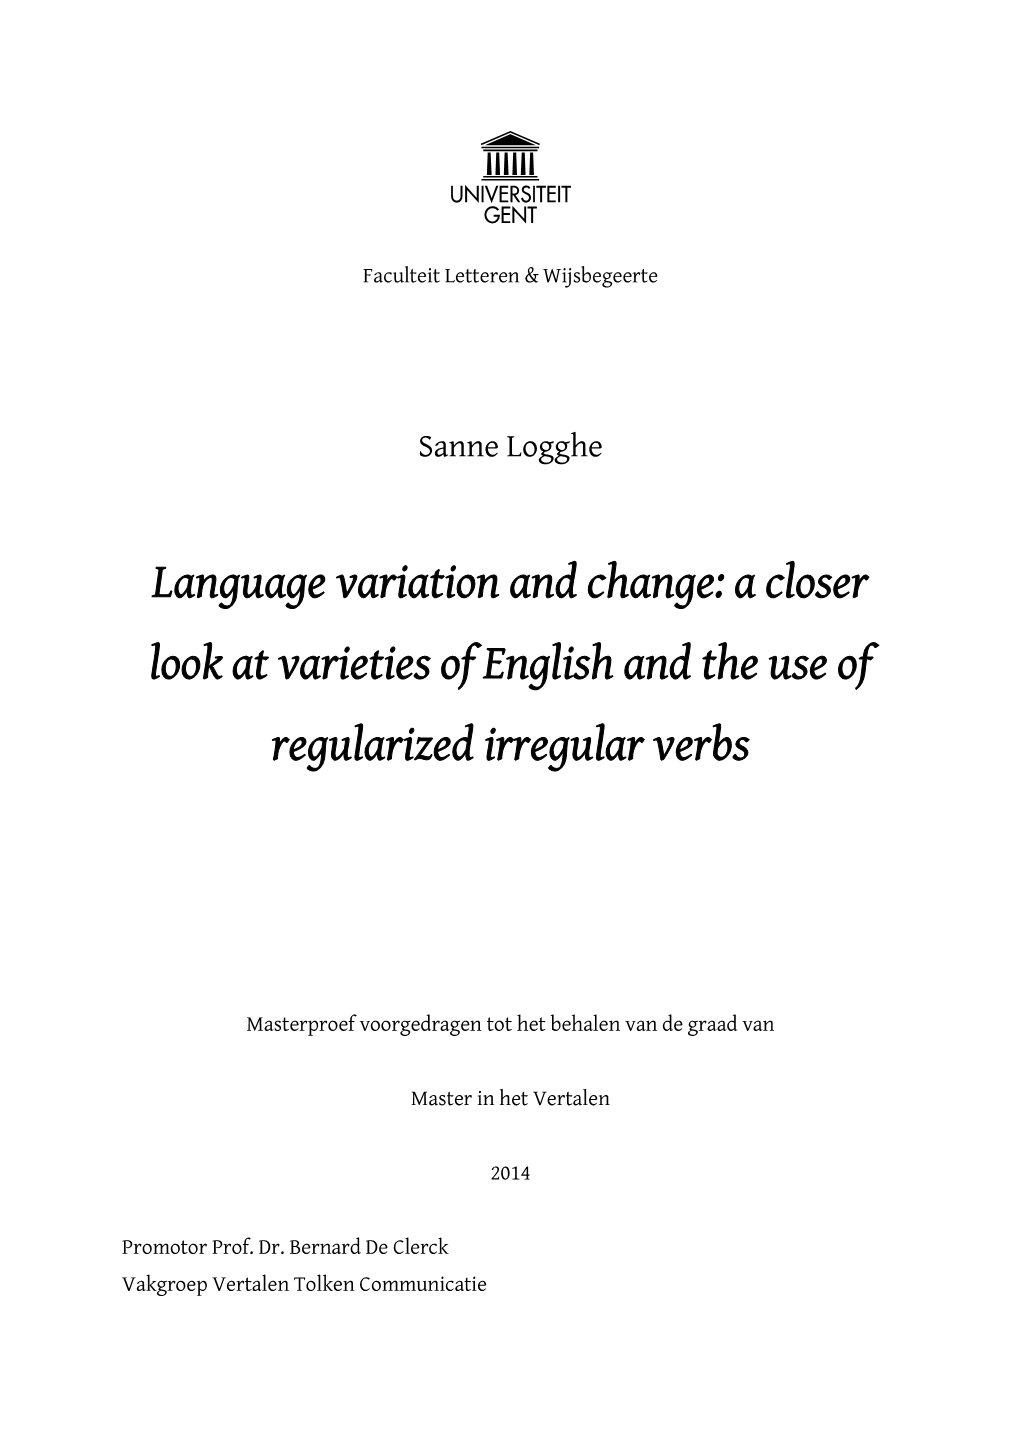 A Closer Look at Varieties of English and the Use of Regularized Irregular